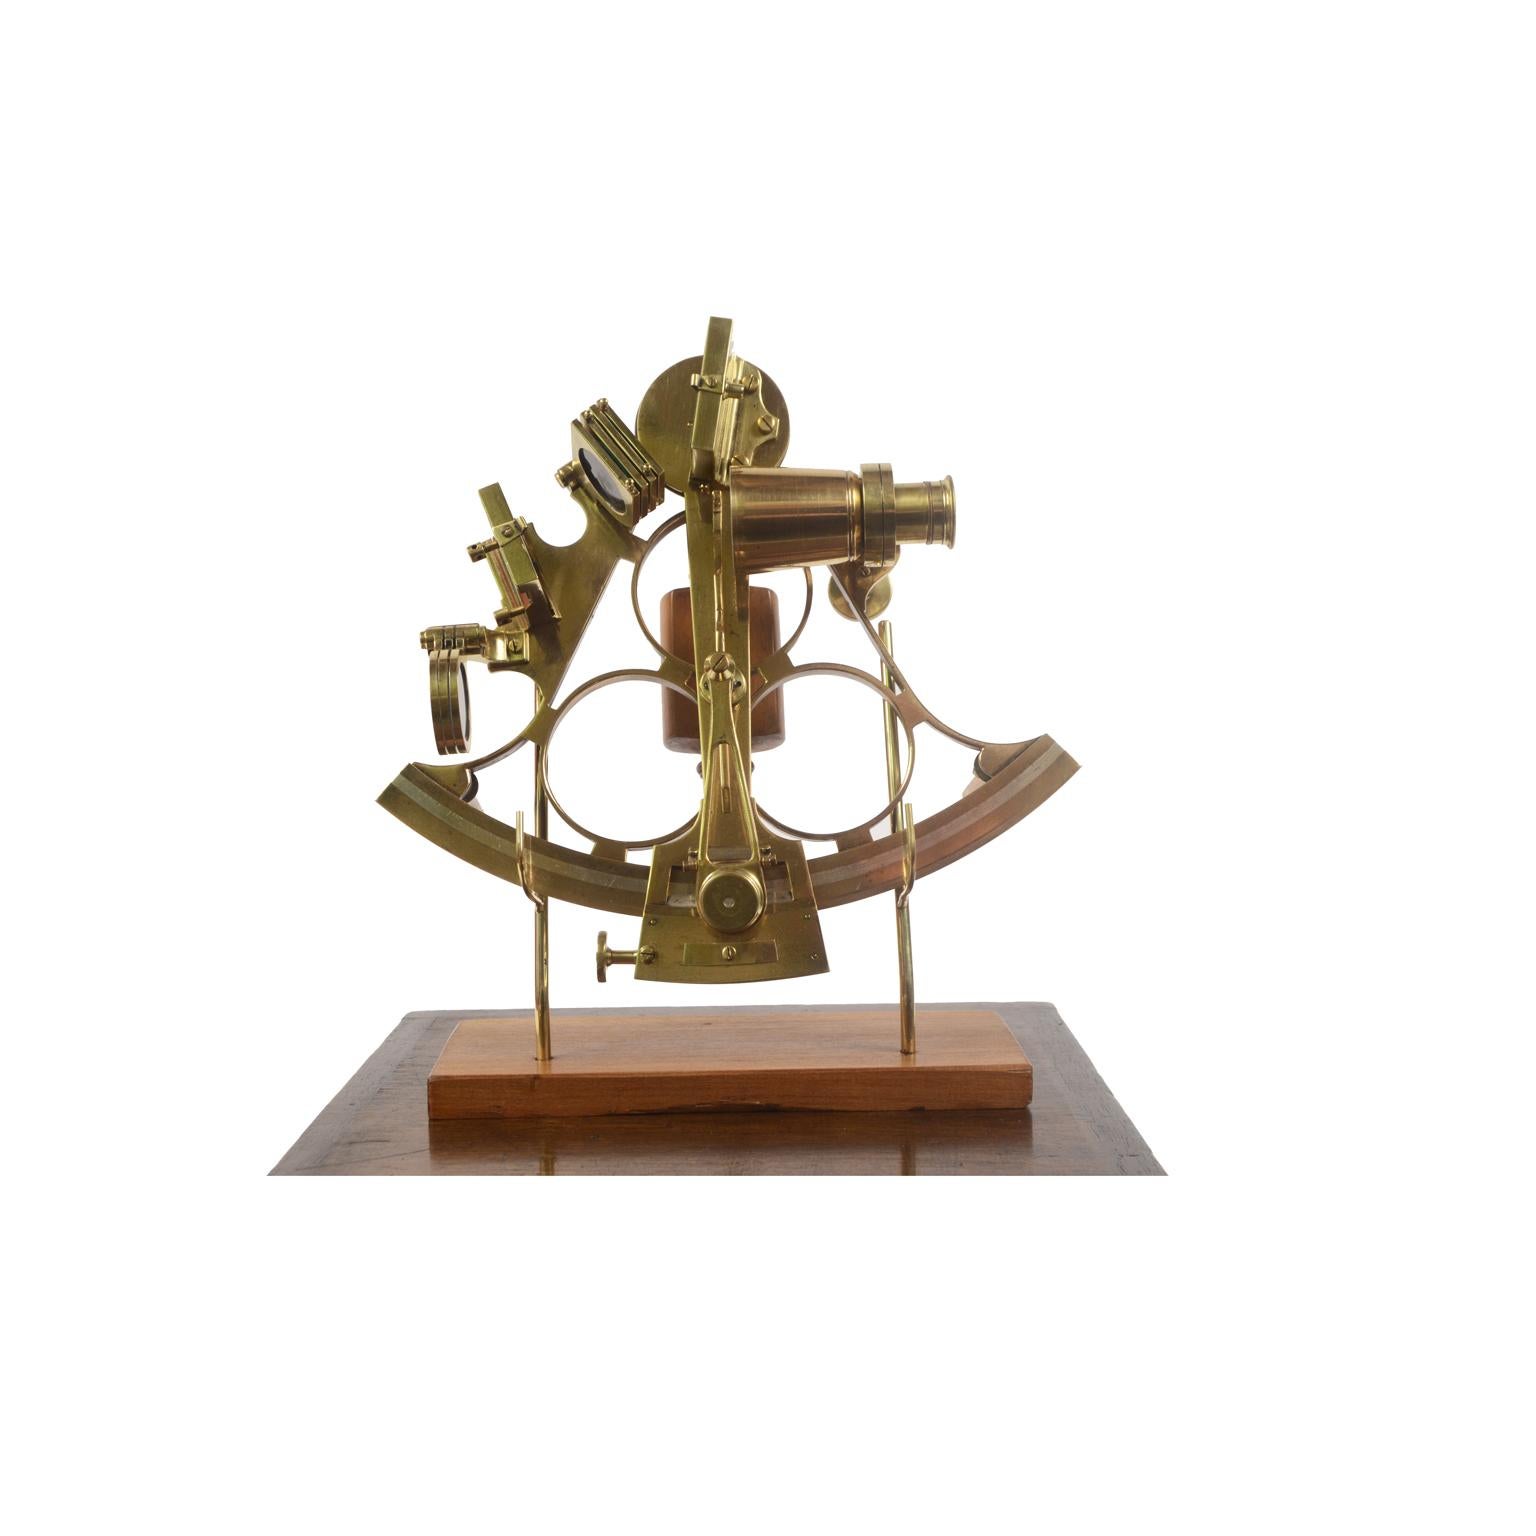 Brass sextant made the second half of the 19th century, placed in its original wooden box. Vernier of engraved silver, handle of boxwood, 3 colored glasses for the fixed mirror and 4 for the mobile one, a telescope, a microscope for reading the